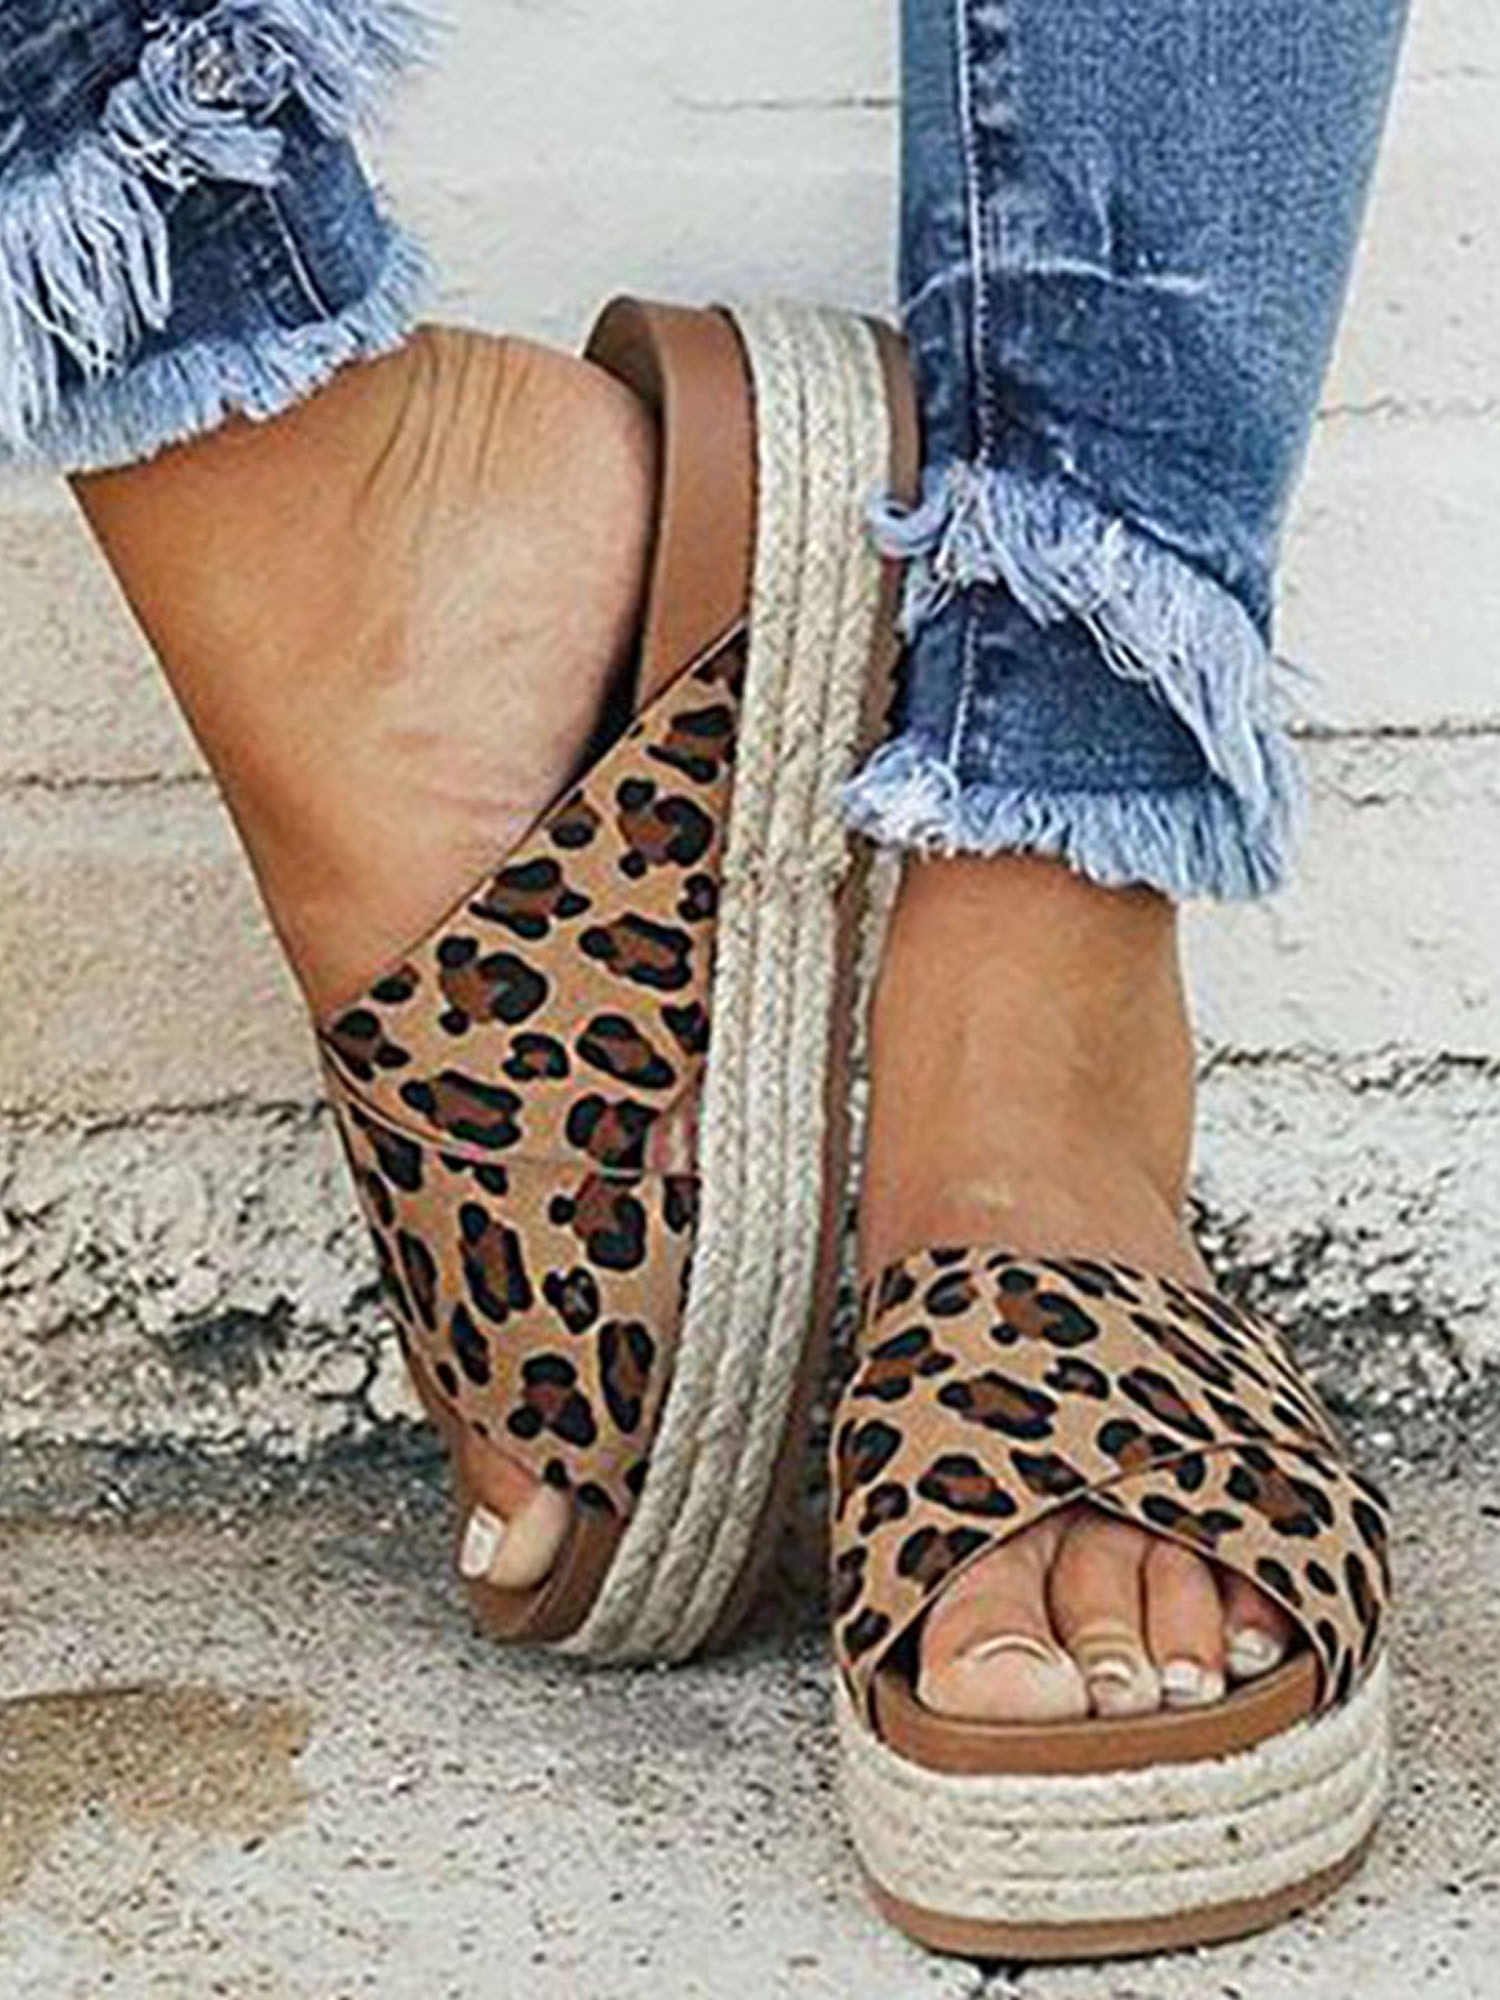 I Guarantee You Will Find Your New Favorite Pair Of Sandals In This Post